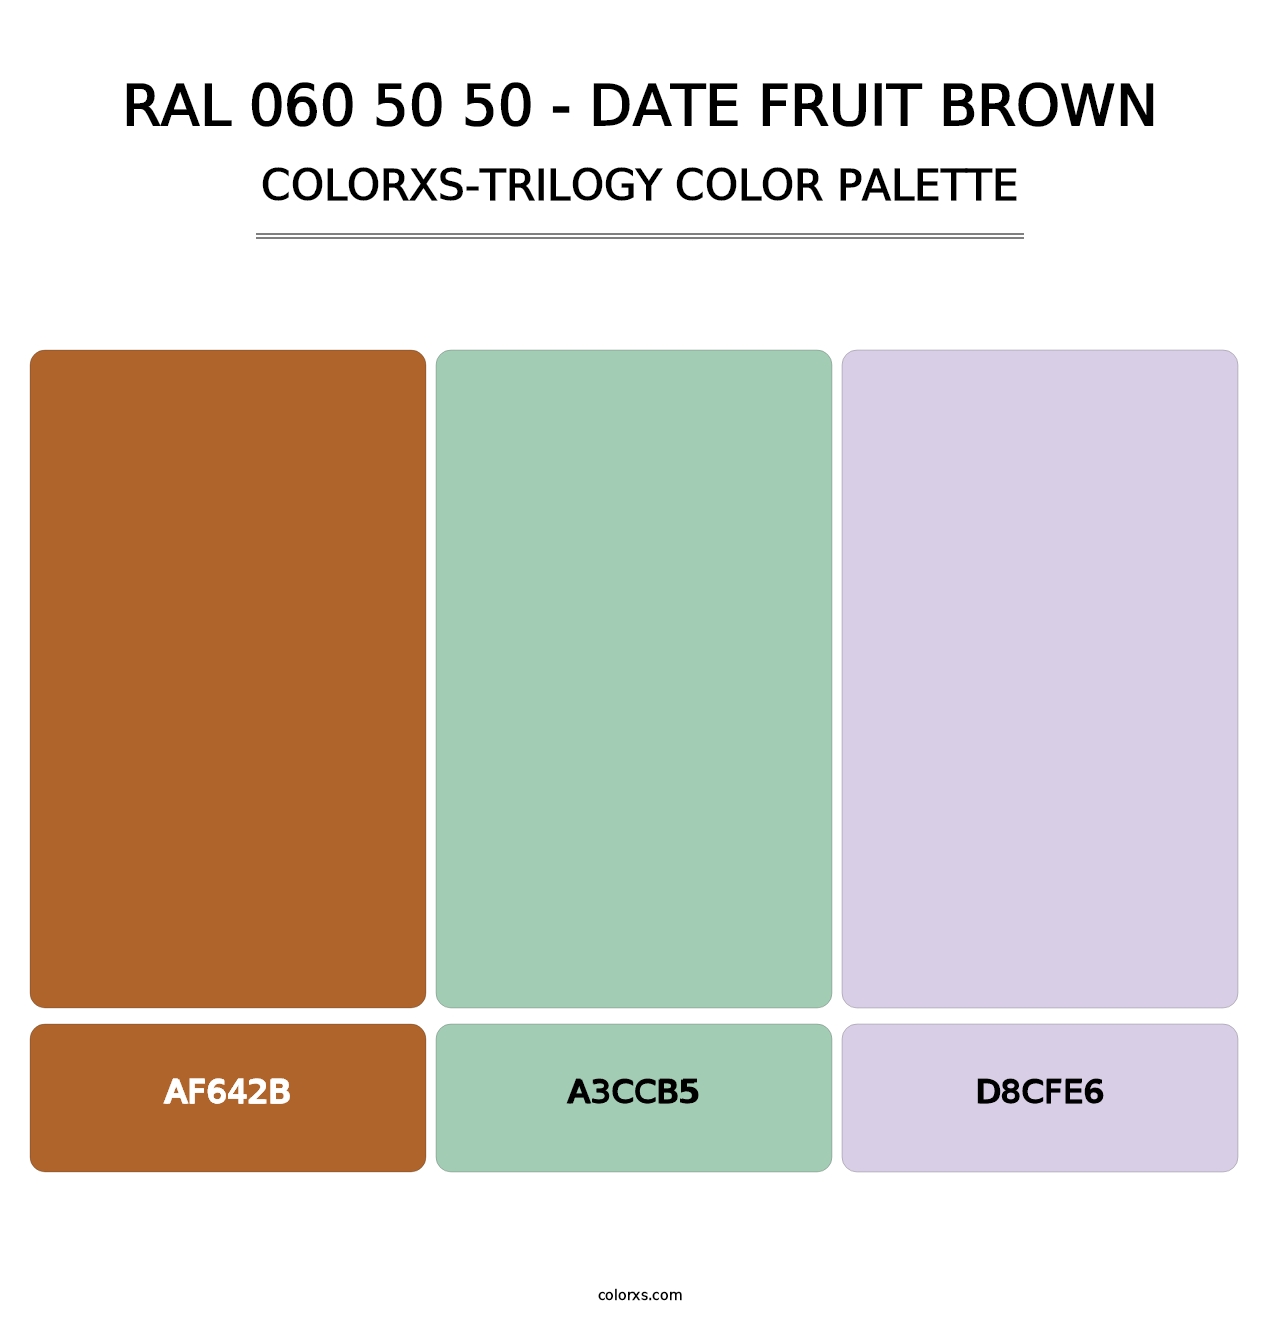 RAL 060 50 50 - Date Fruit Brown - Colorxs Trilogy Palette